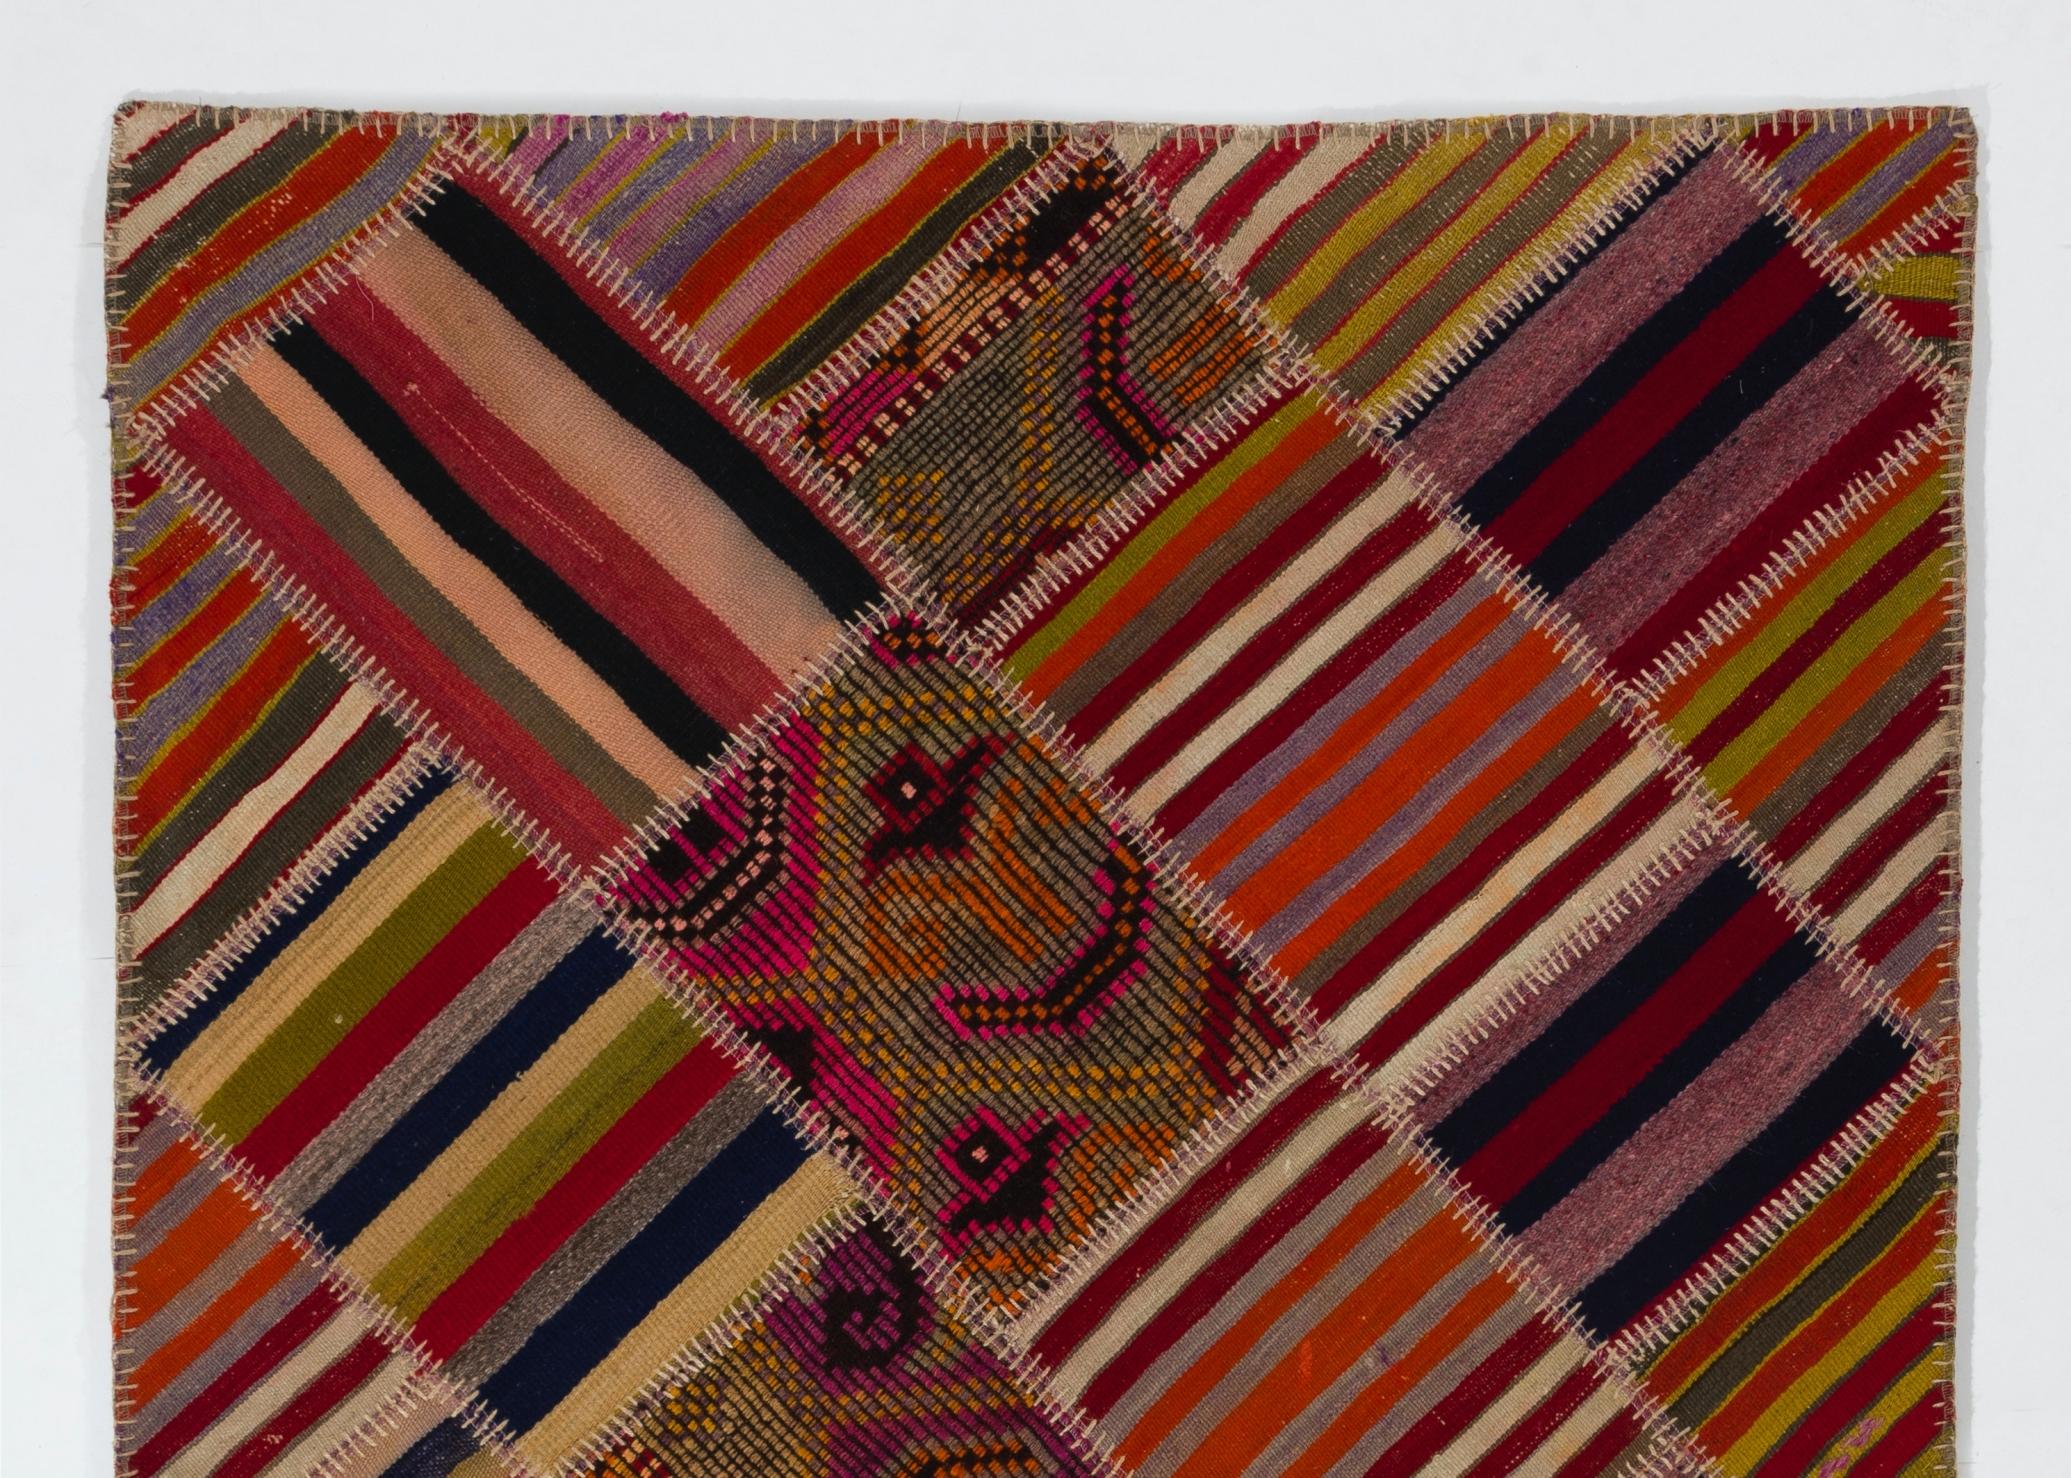 A colorful Turkish kilim rug (flat-weave) hand-stitched from pieces of hand-woven vintage kilims. It features an assortment of patches in vivid colors with a design of stripes and hook motifs. It is made of natural wool, very sturdy, professionally